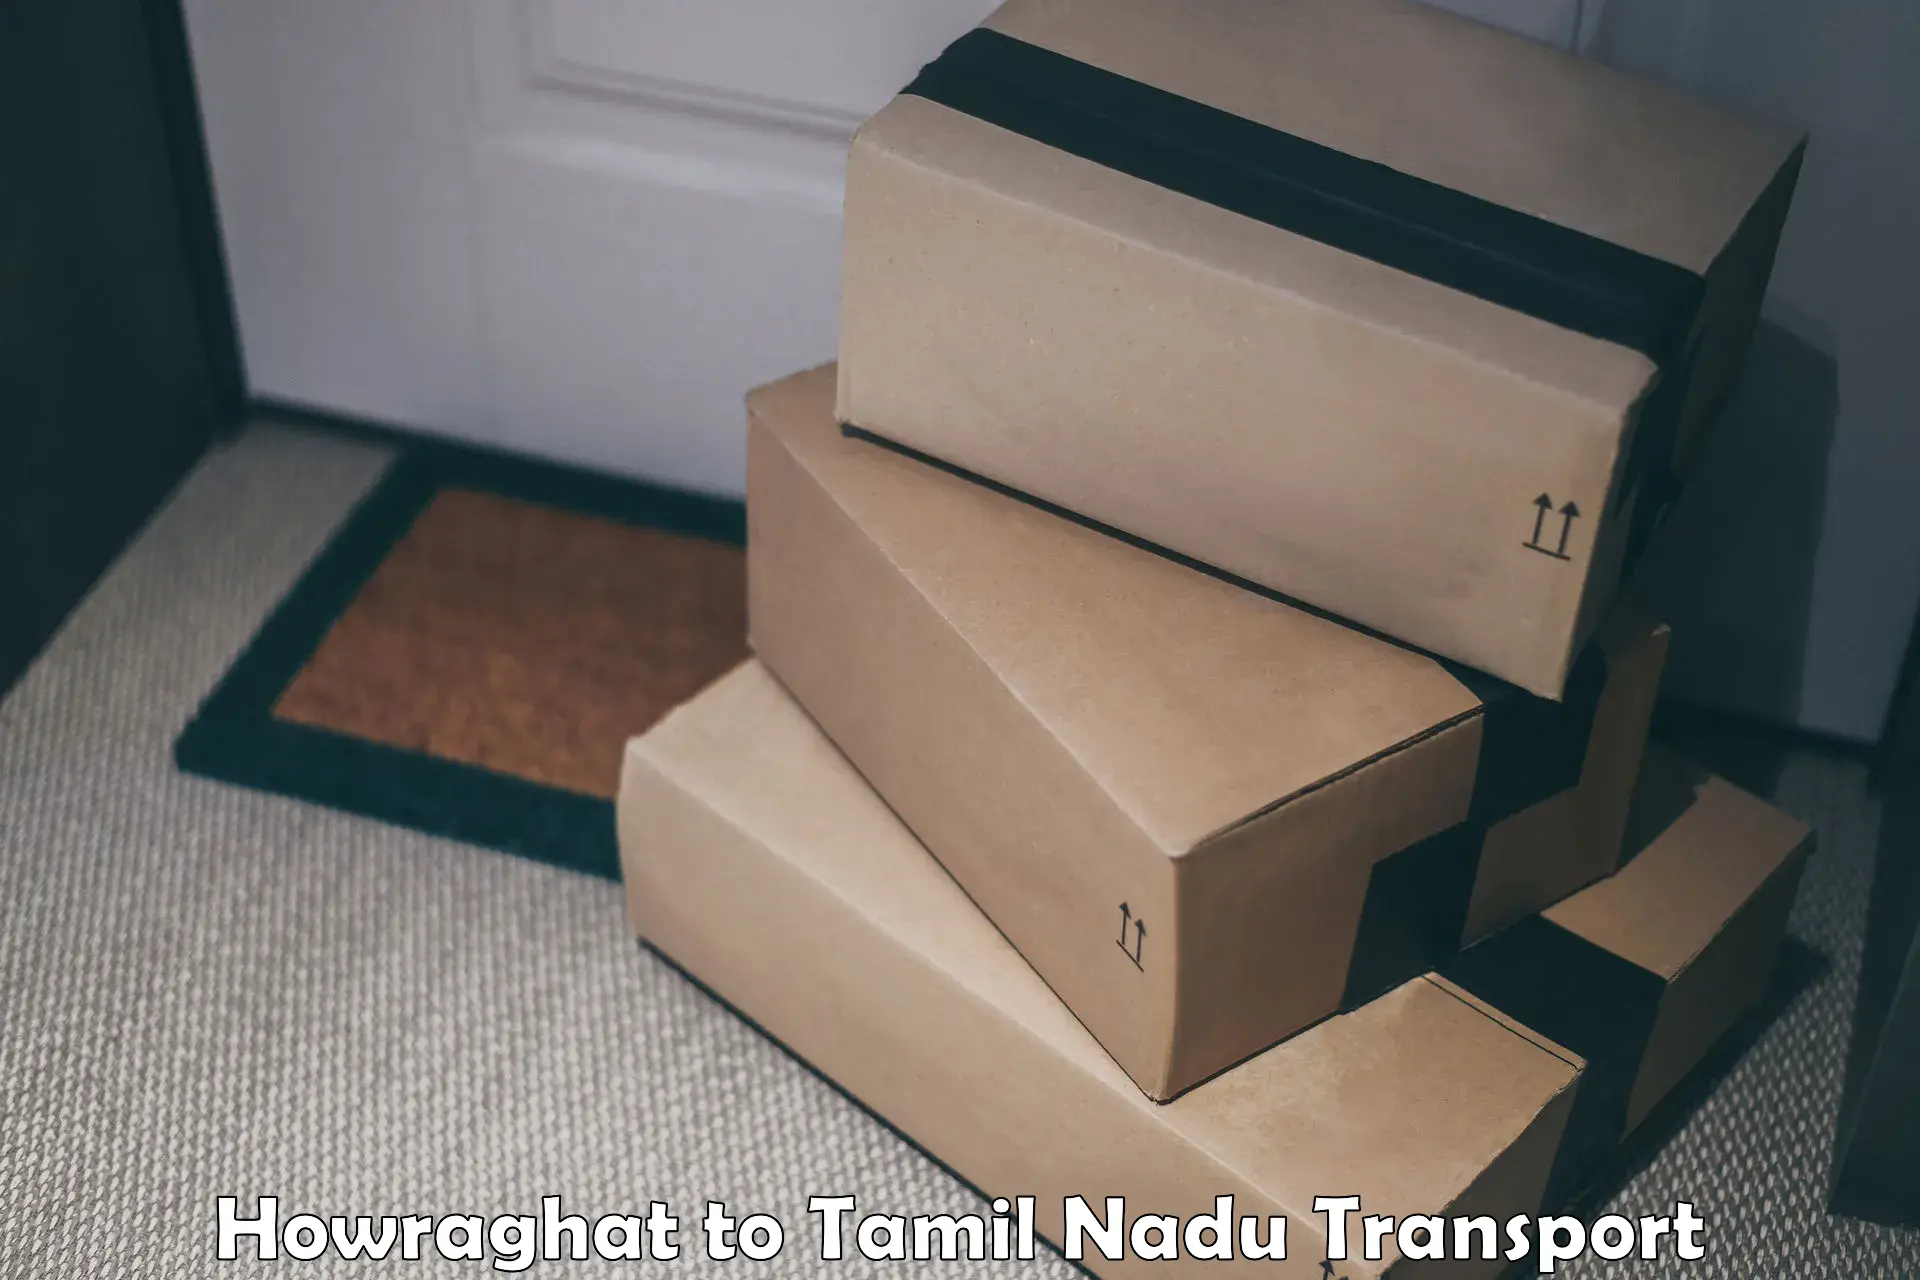 Goods delivery service in Howraghat to Papanasam